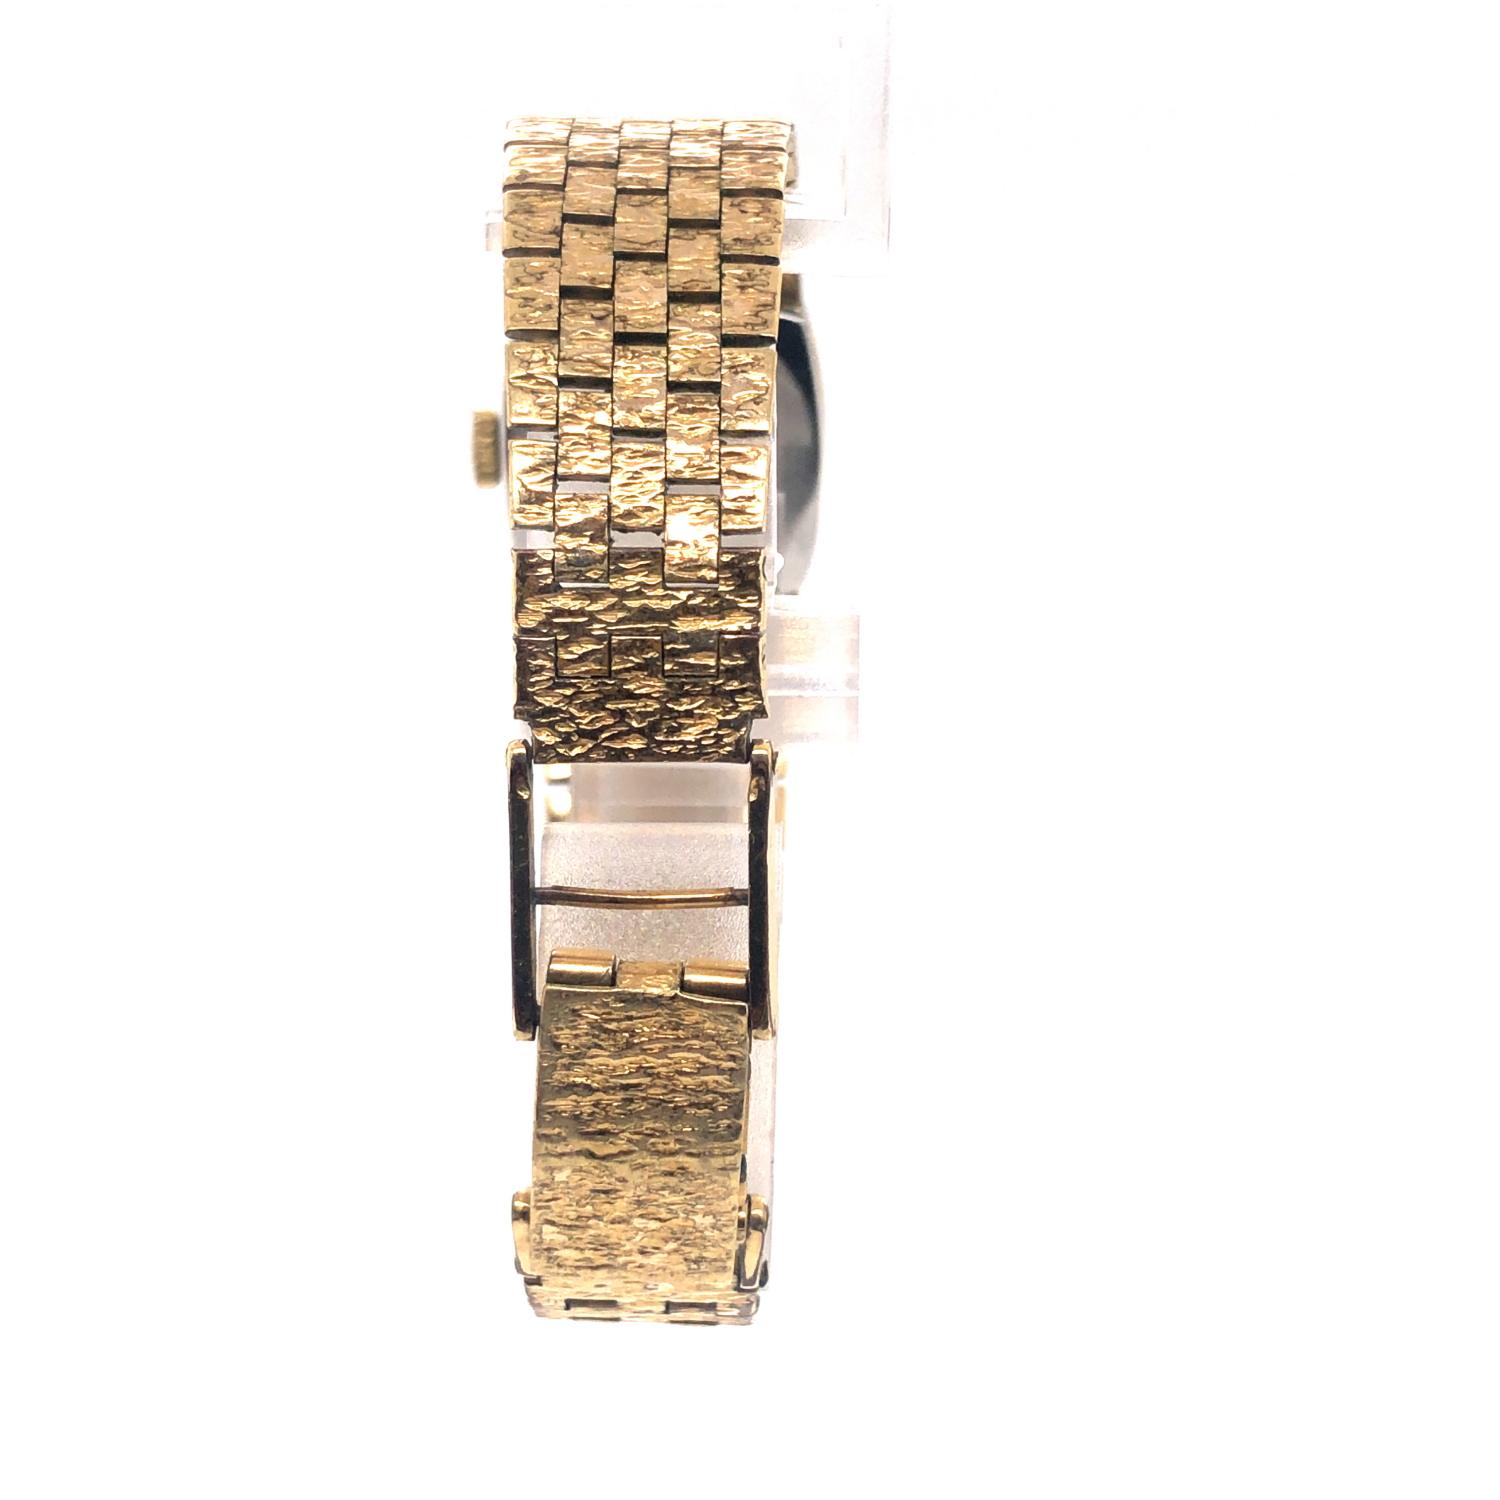 A LADIES GOLD PLATED BULOVA WATCH, ON A BRICK STYLE BRACELET WITH A LADDER CLASP. LENGTH 18cms. - Image 2 of 4